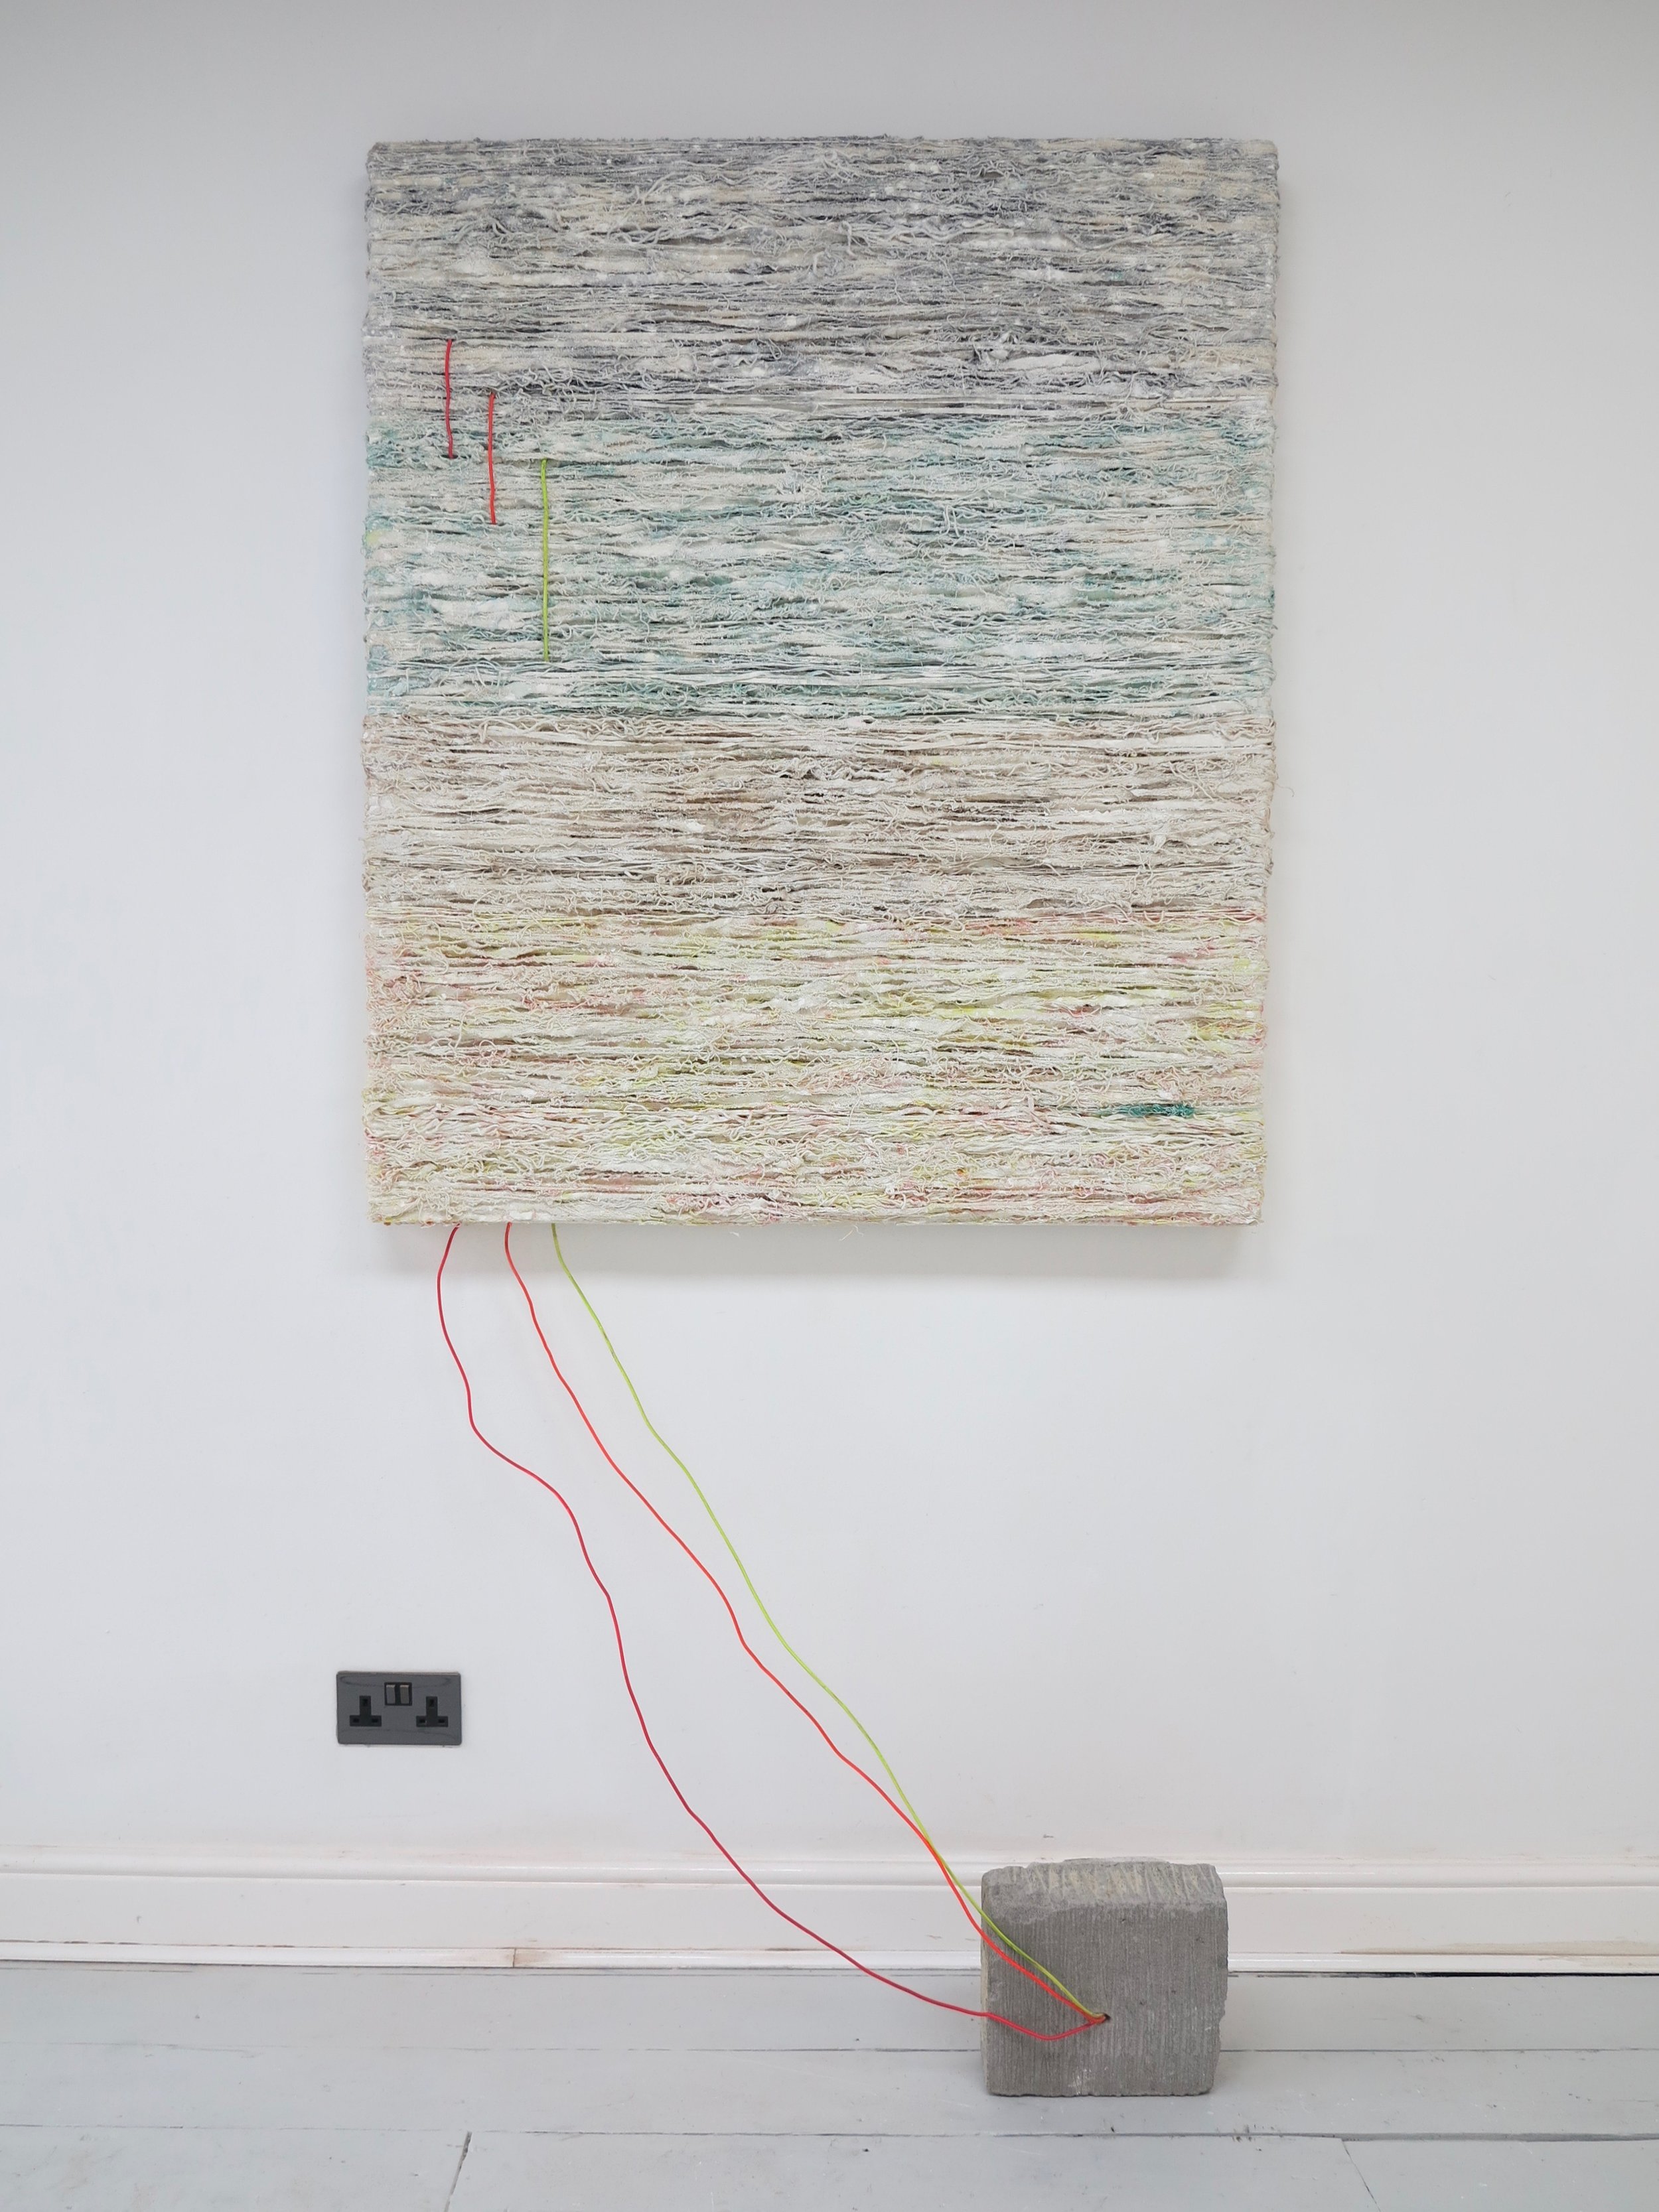   Wired.   Alkyd Resin, acrylic, raw pigment, varnish, PVA, plastic, electrical wire, concrete and cotton.  Dimensions variable.   Hack Morecambe  @ Gas Contemporary, Morecambe 2018. 